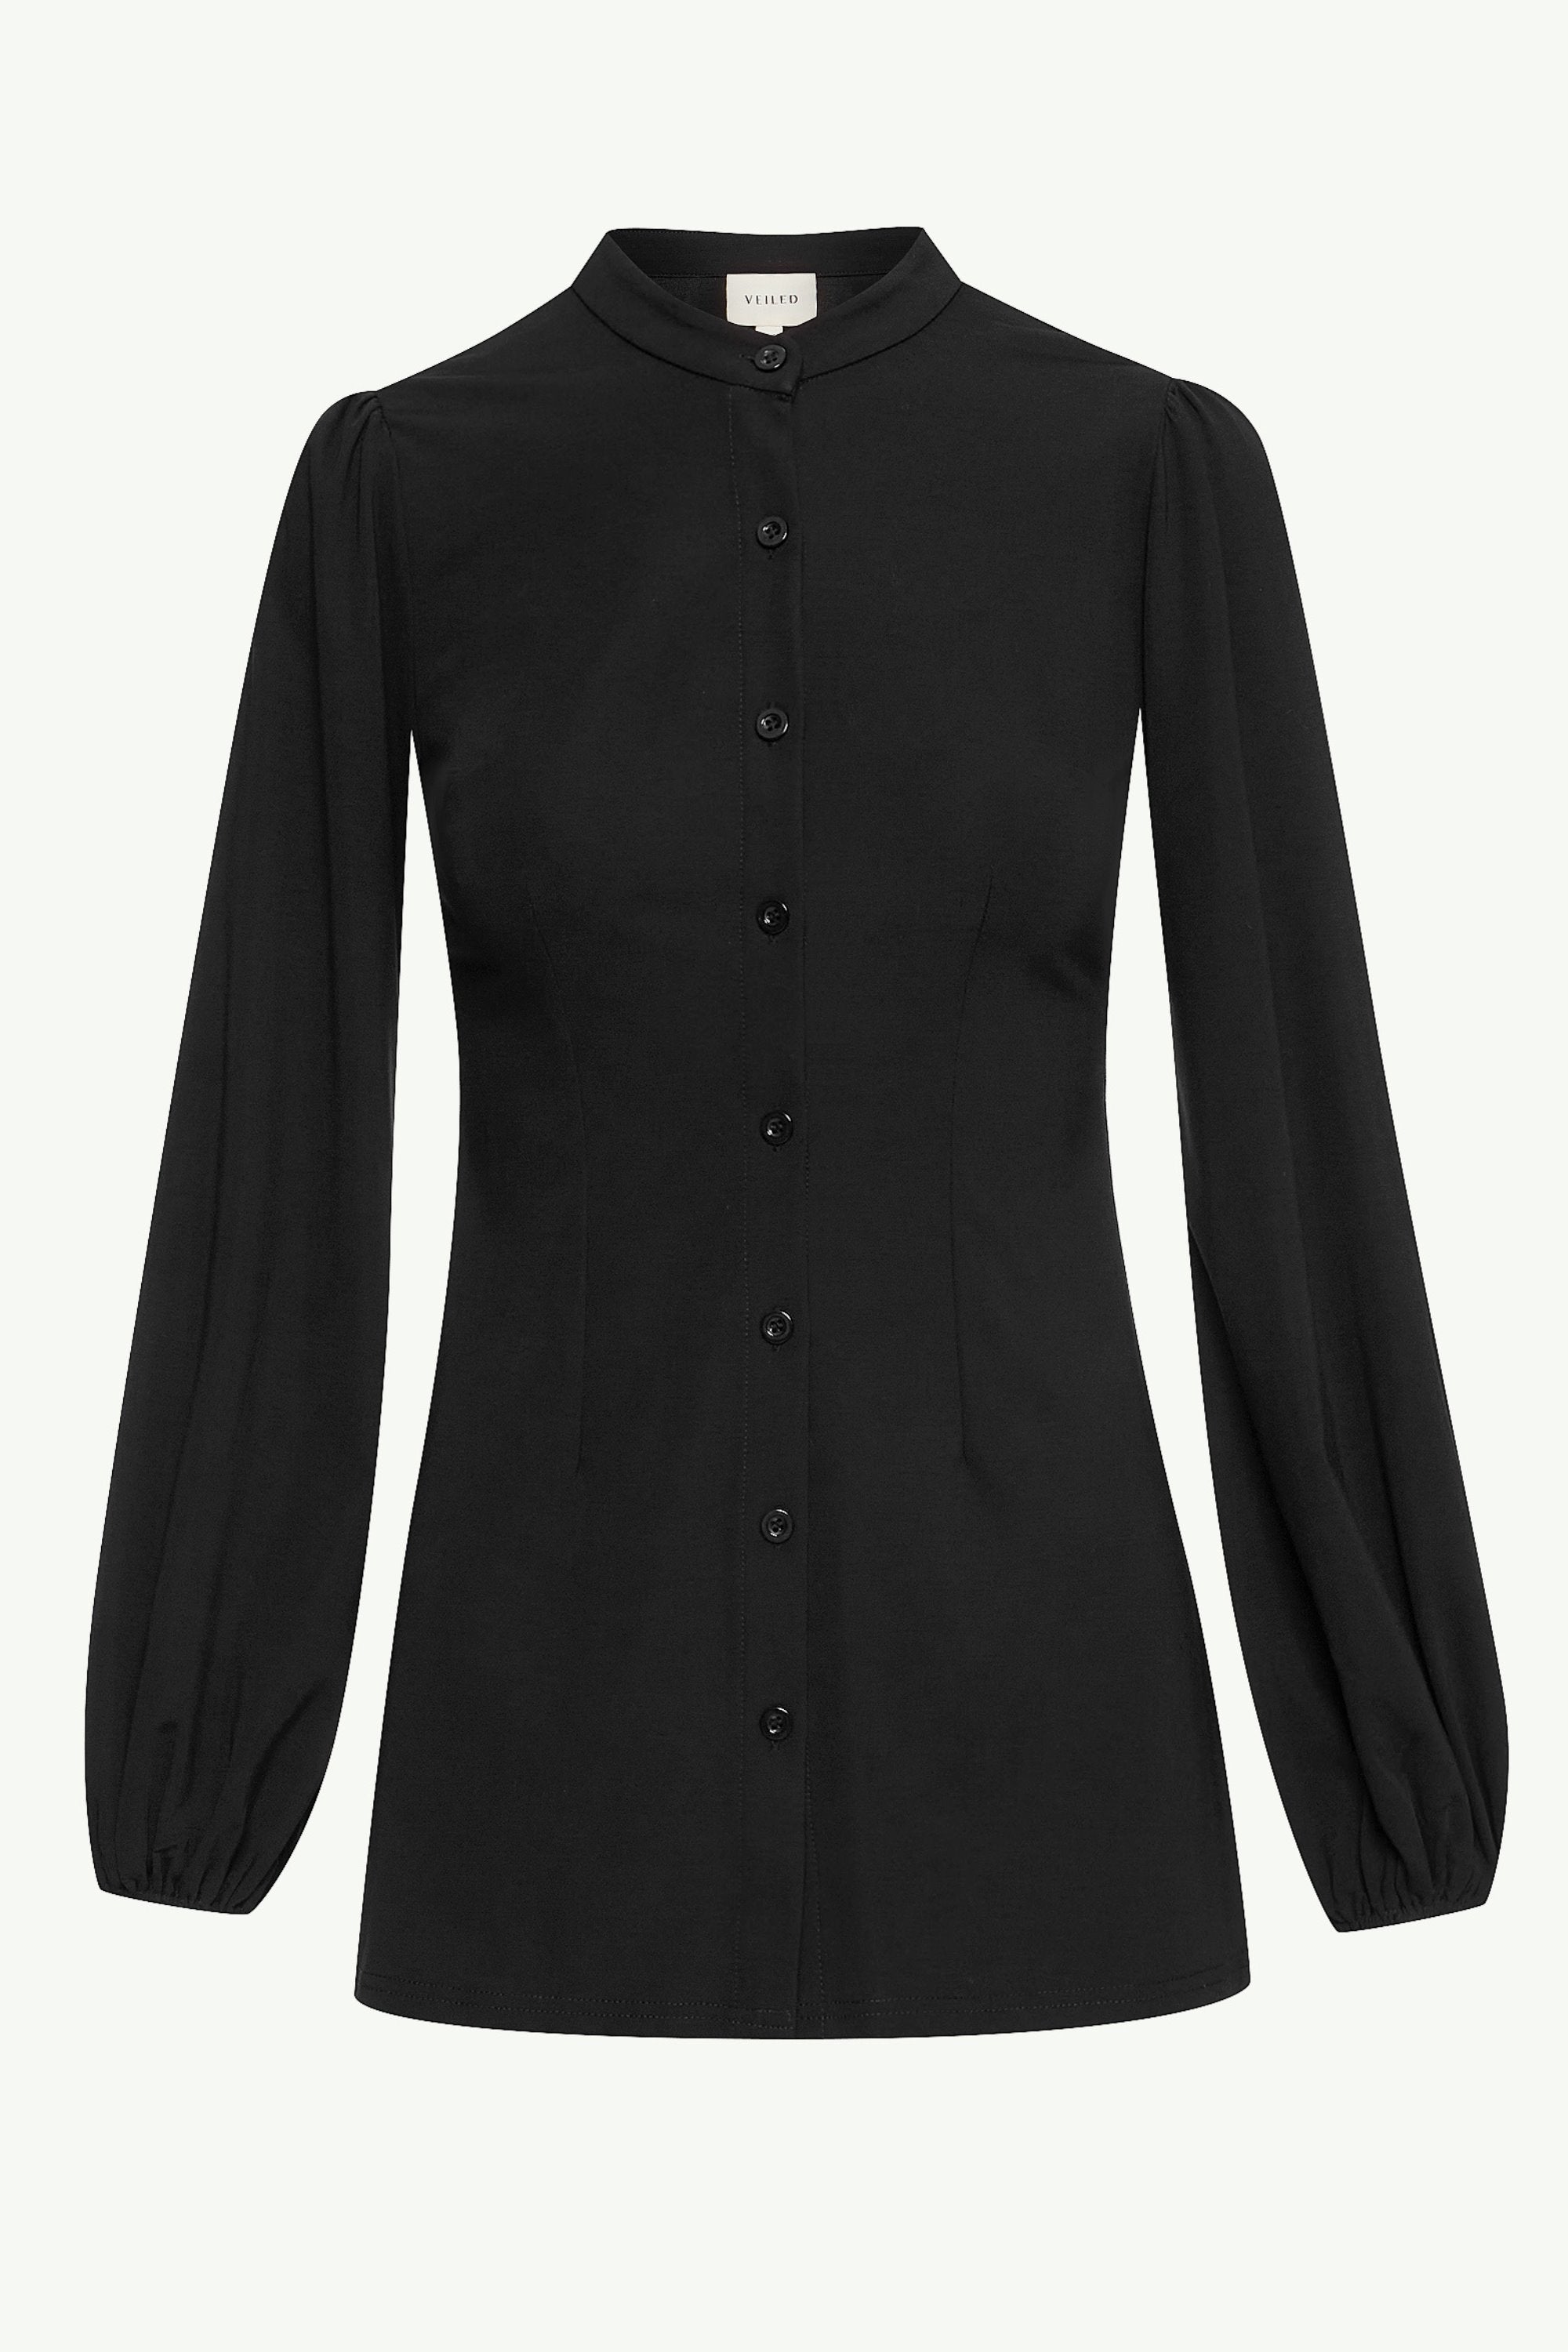 Rayana Jersey Button Down Top - Black Clothing epschoolboard 